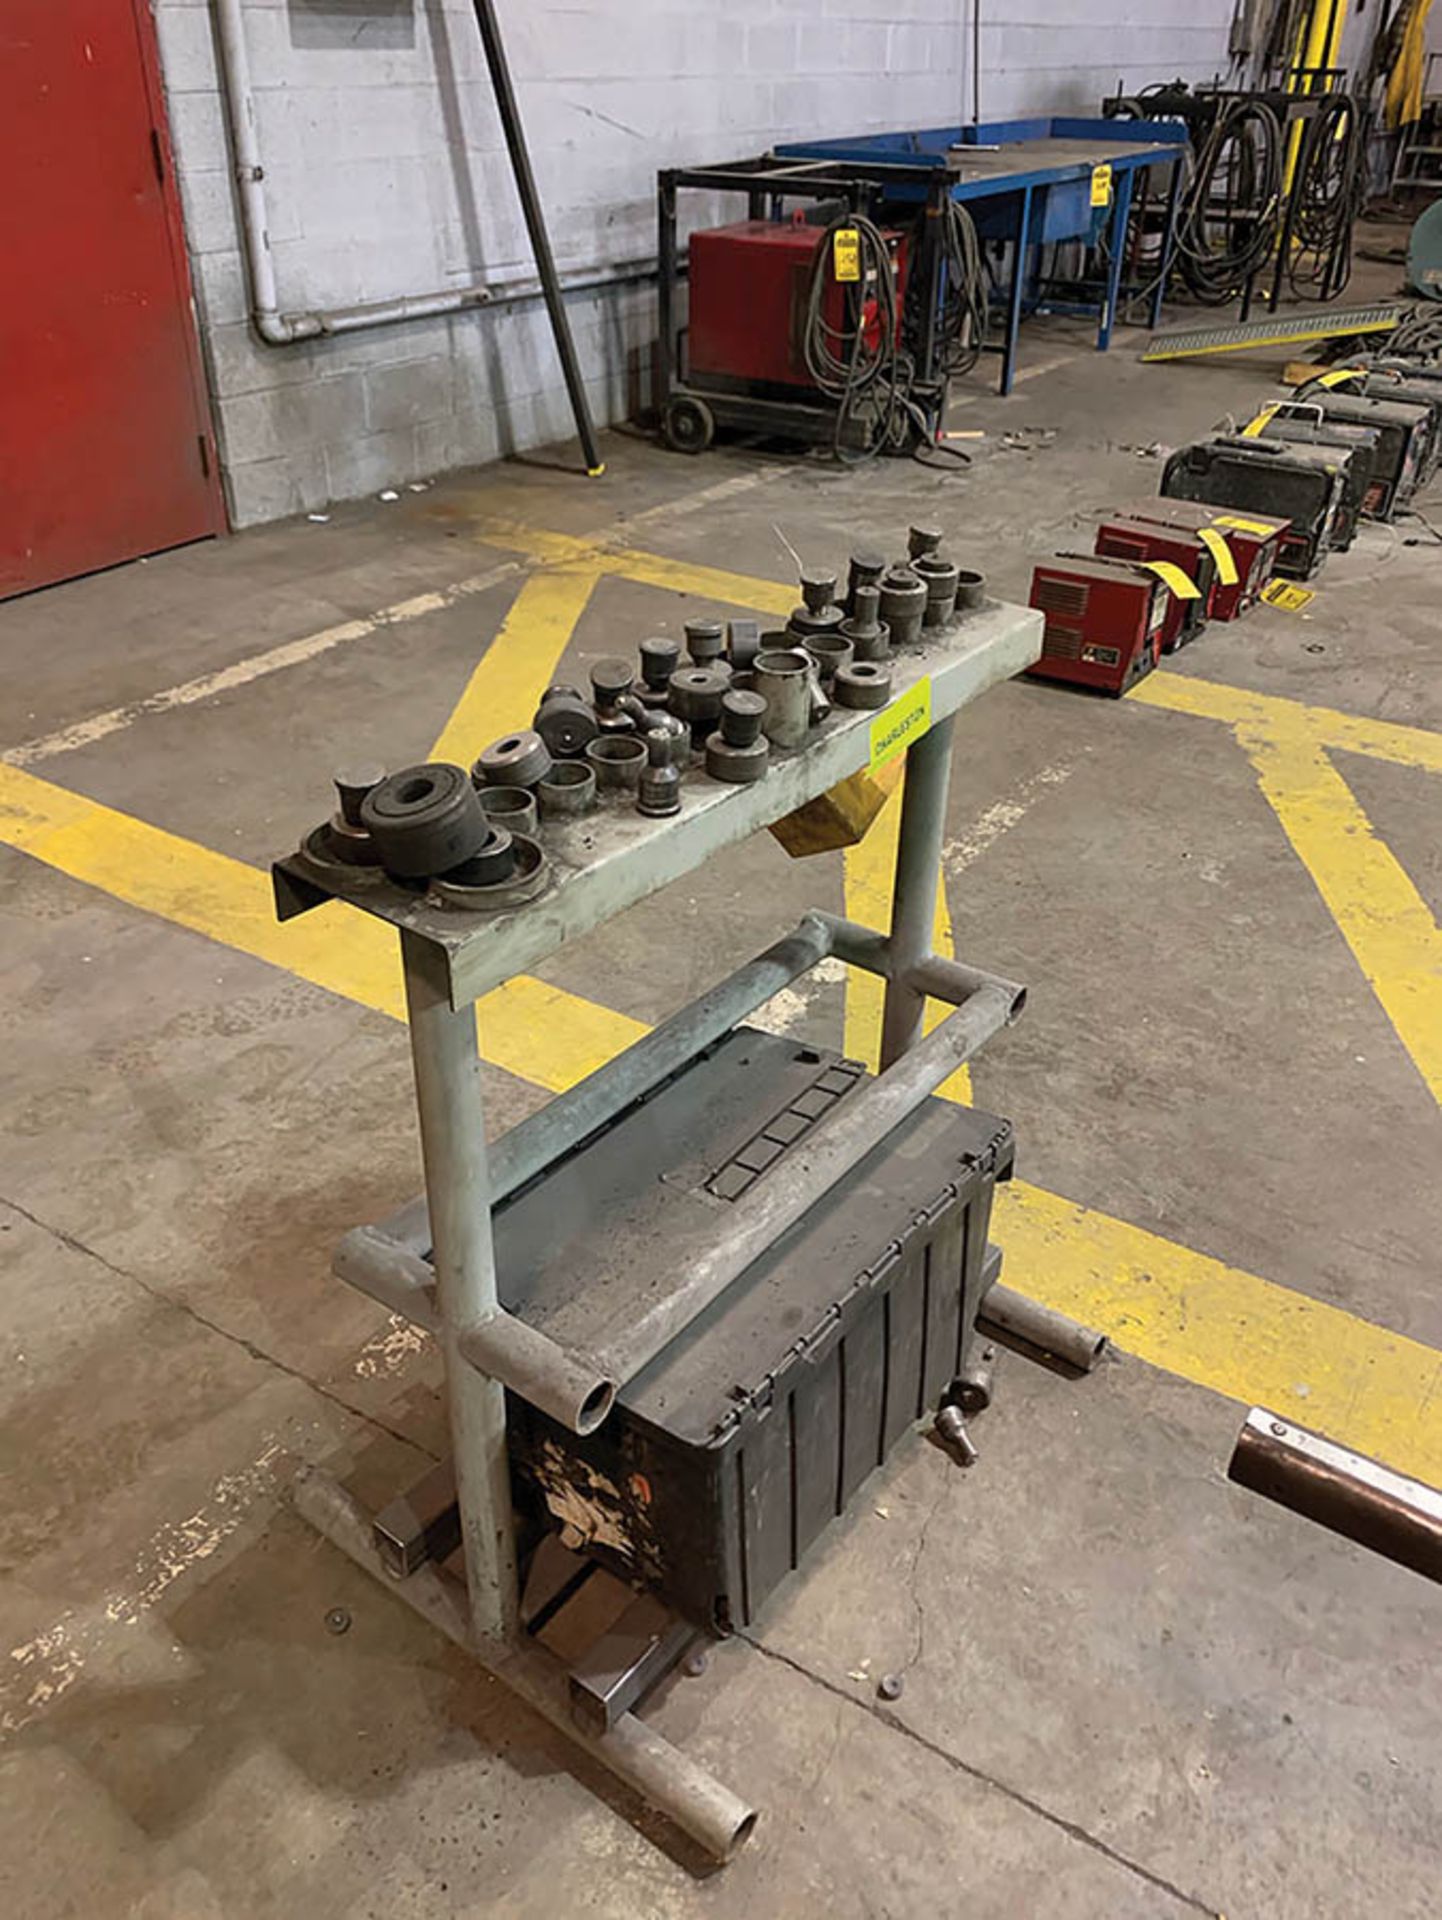 RACK AND CONTENTS OF IRON WORKER TOOLING